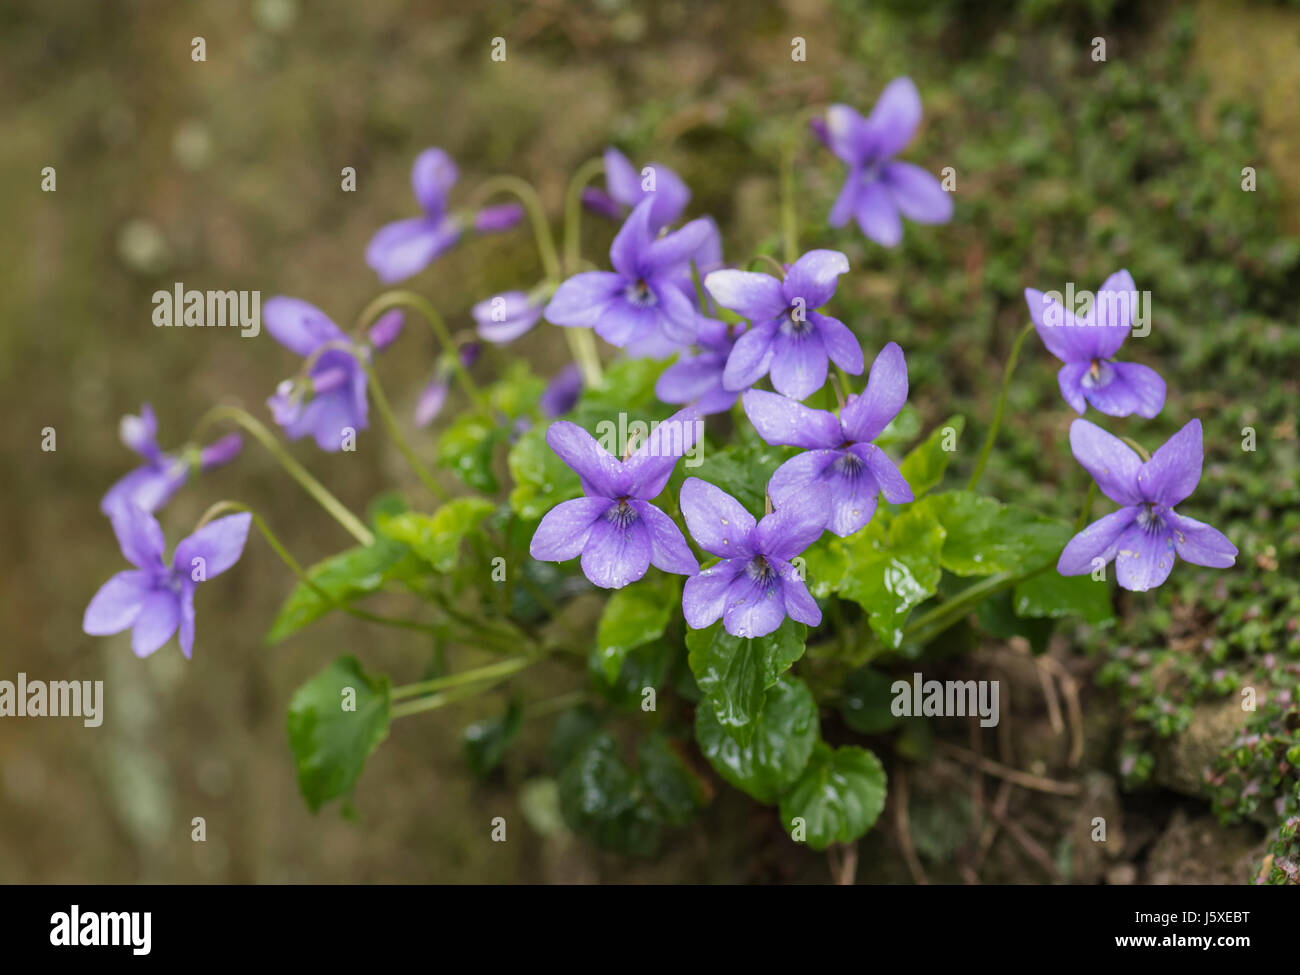 Violet, Dog violet, Viola riviniana, Cluster of mauve flowers on mossy rocks in the rain. Stock Photo